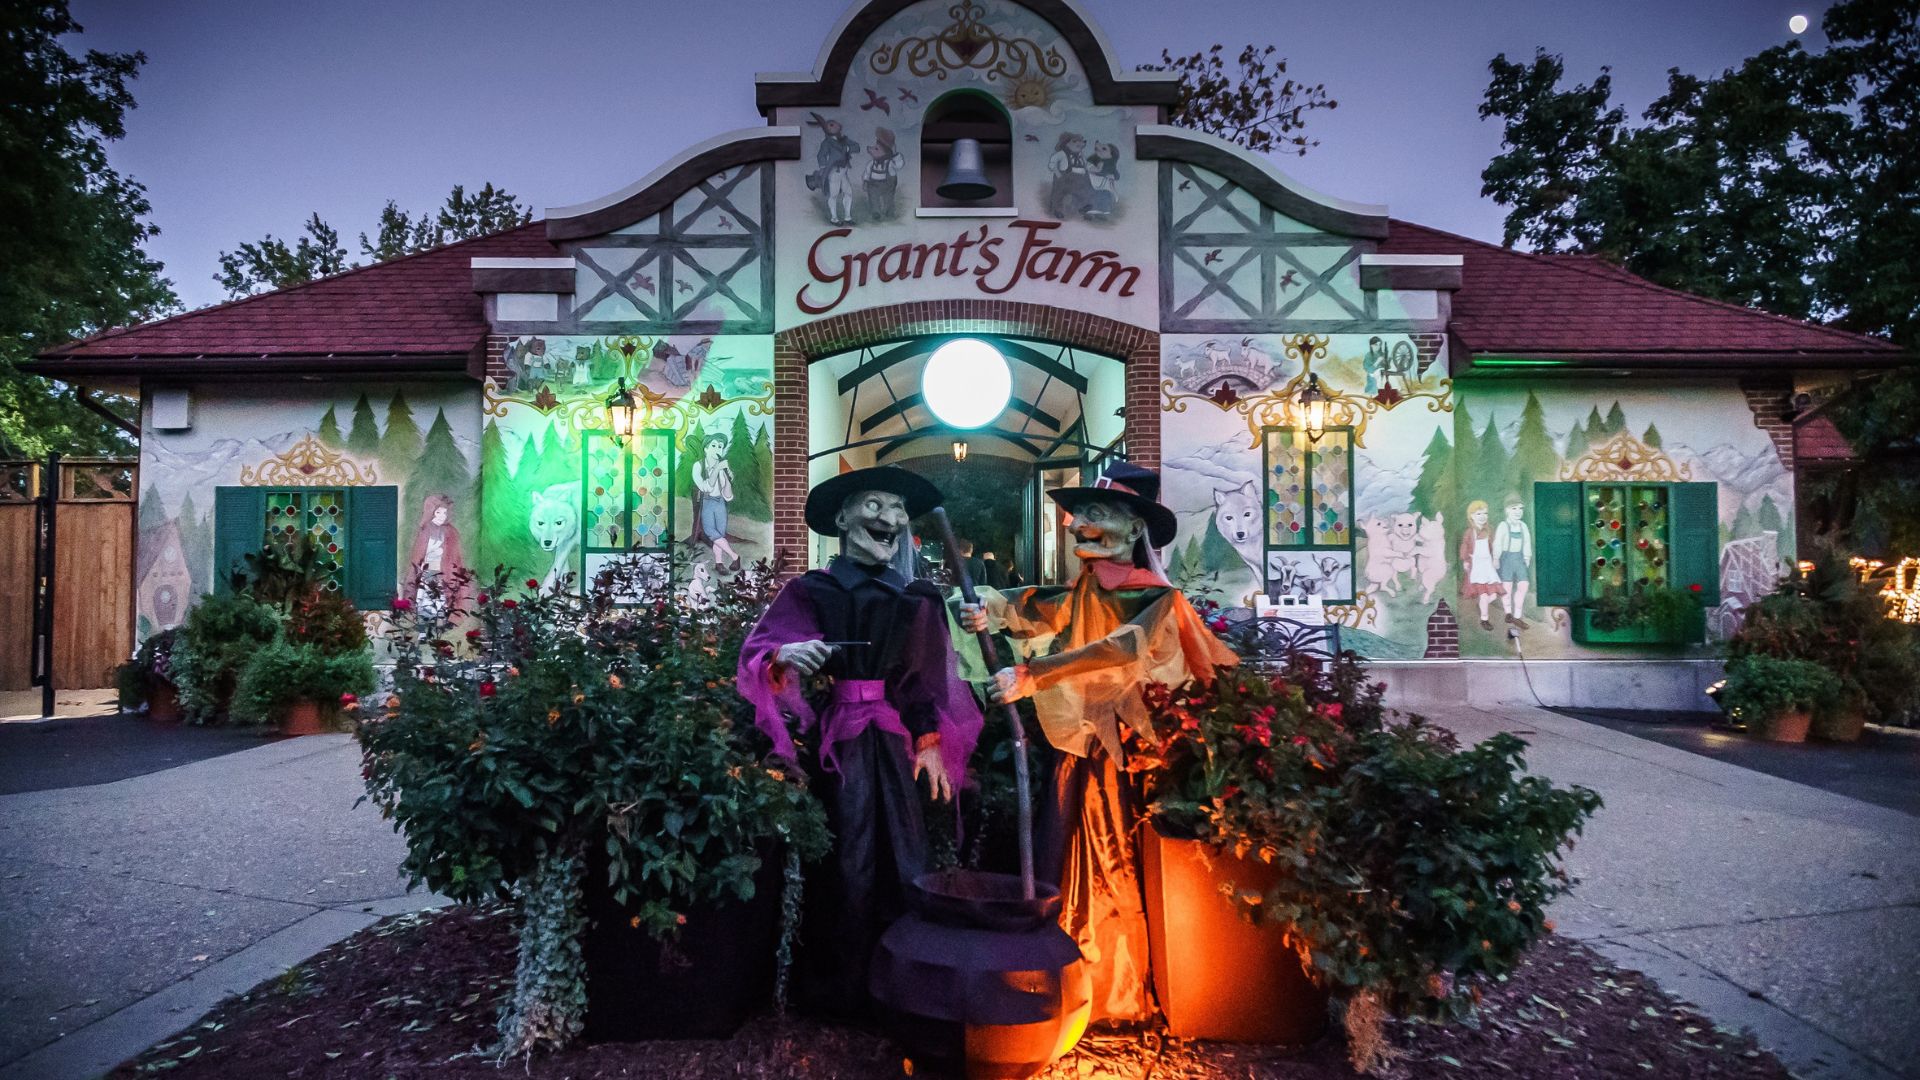 During Halloween Nights at Grant's Farm, the park features spooky decorations.